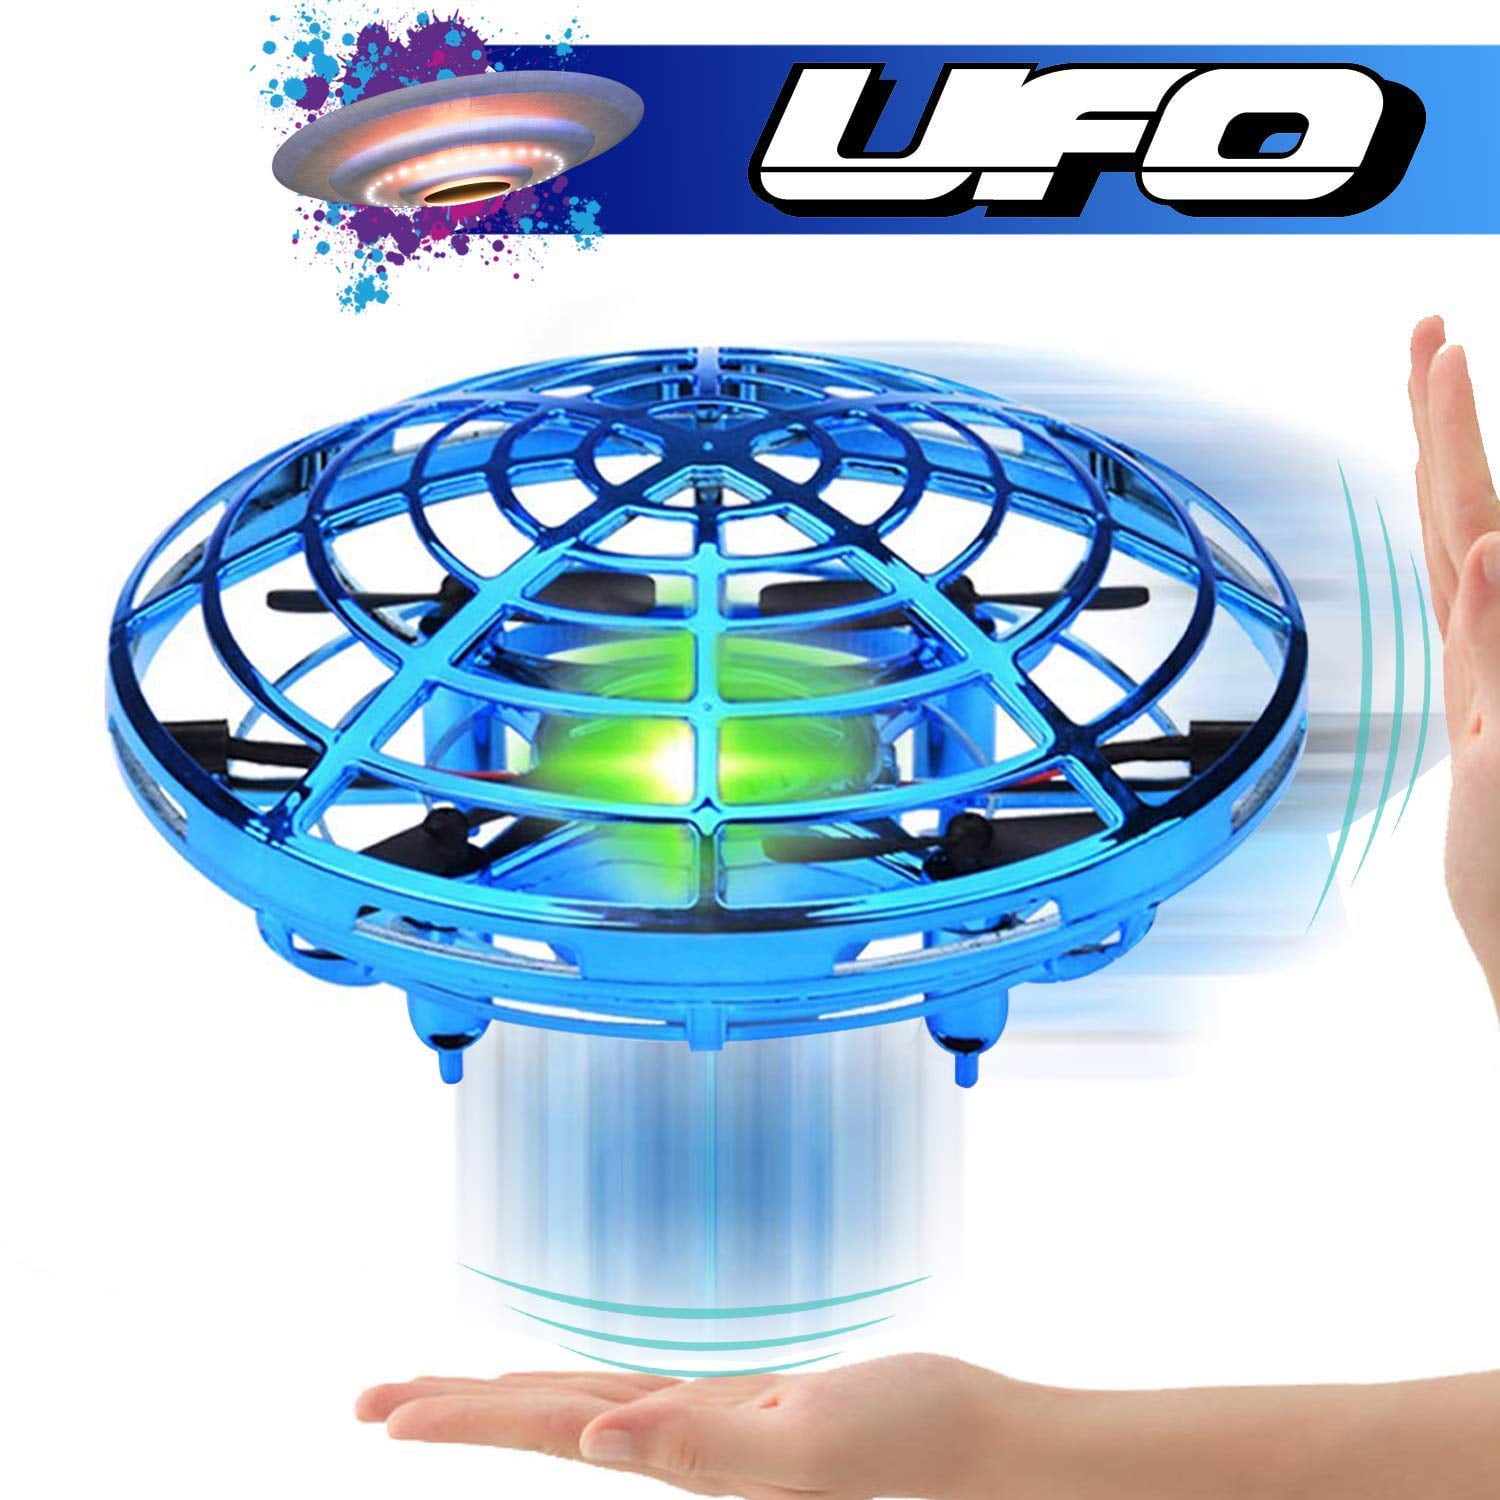 ufo drone toy reviews